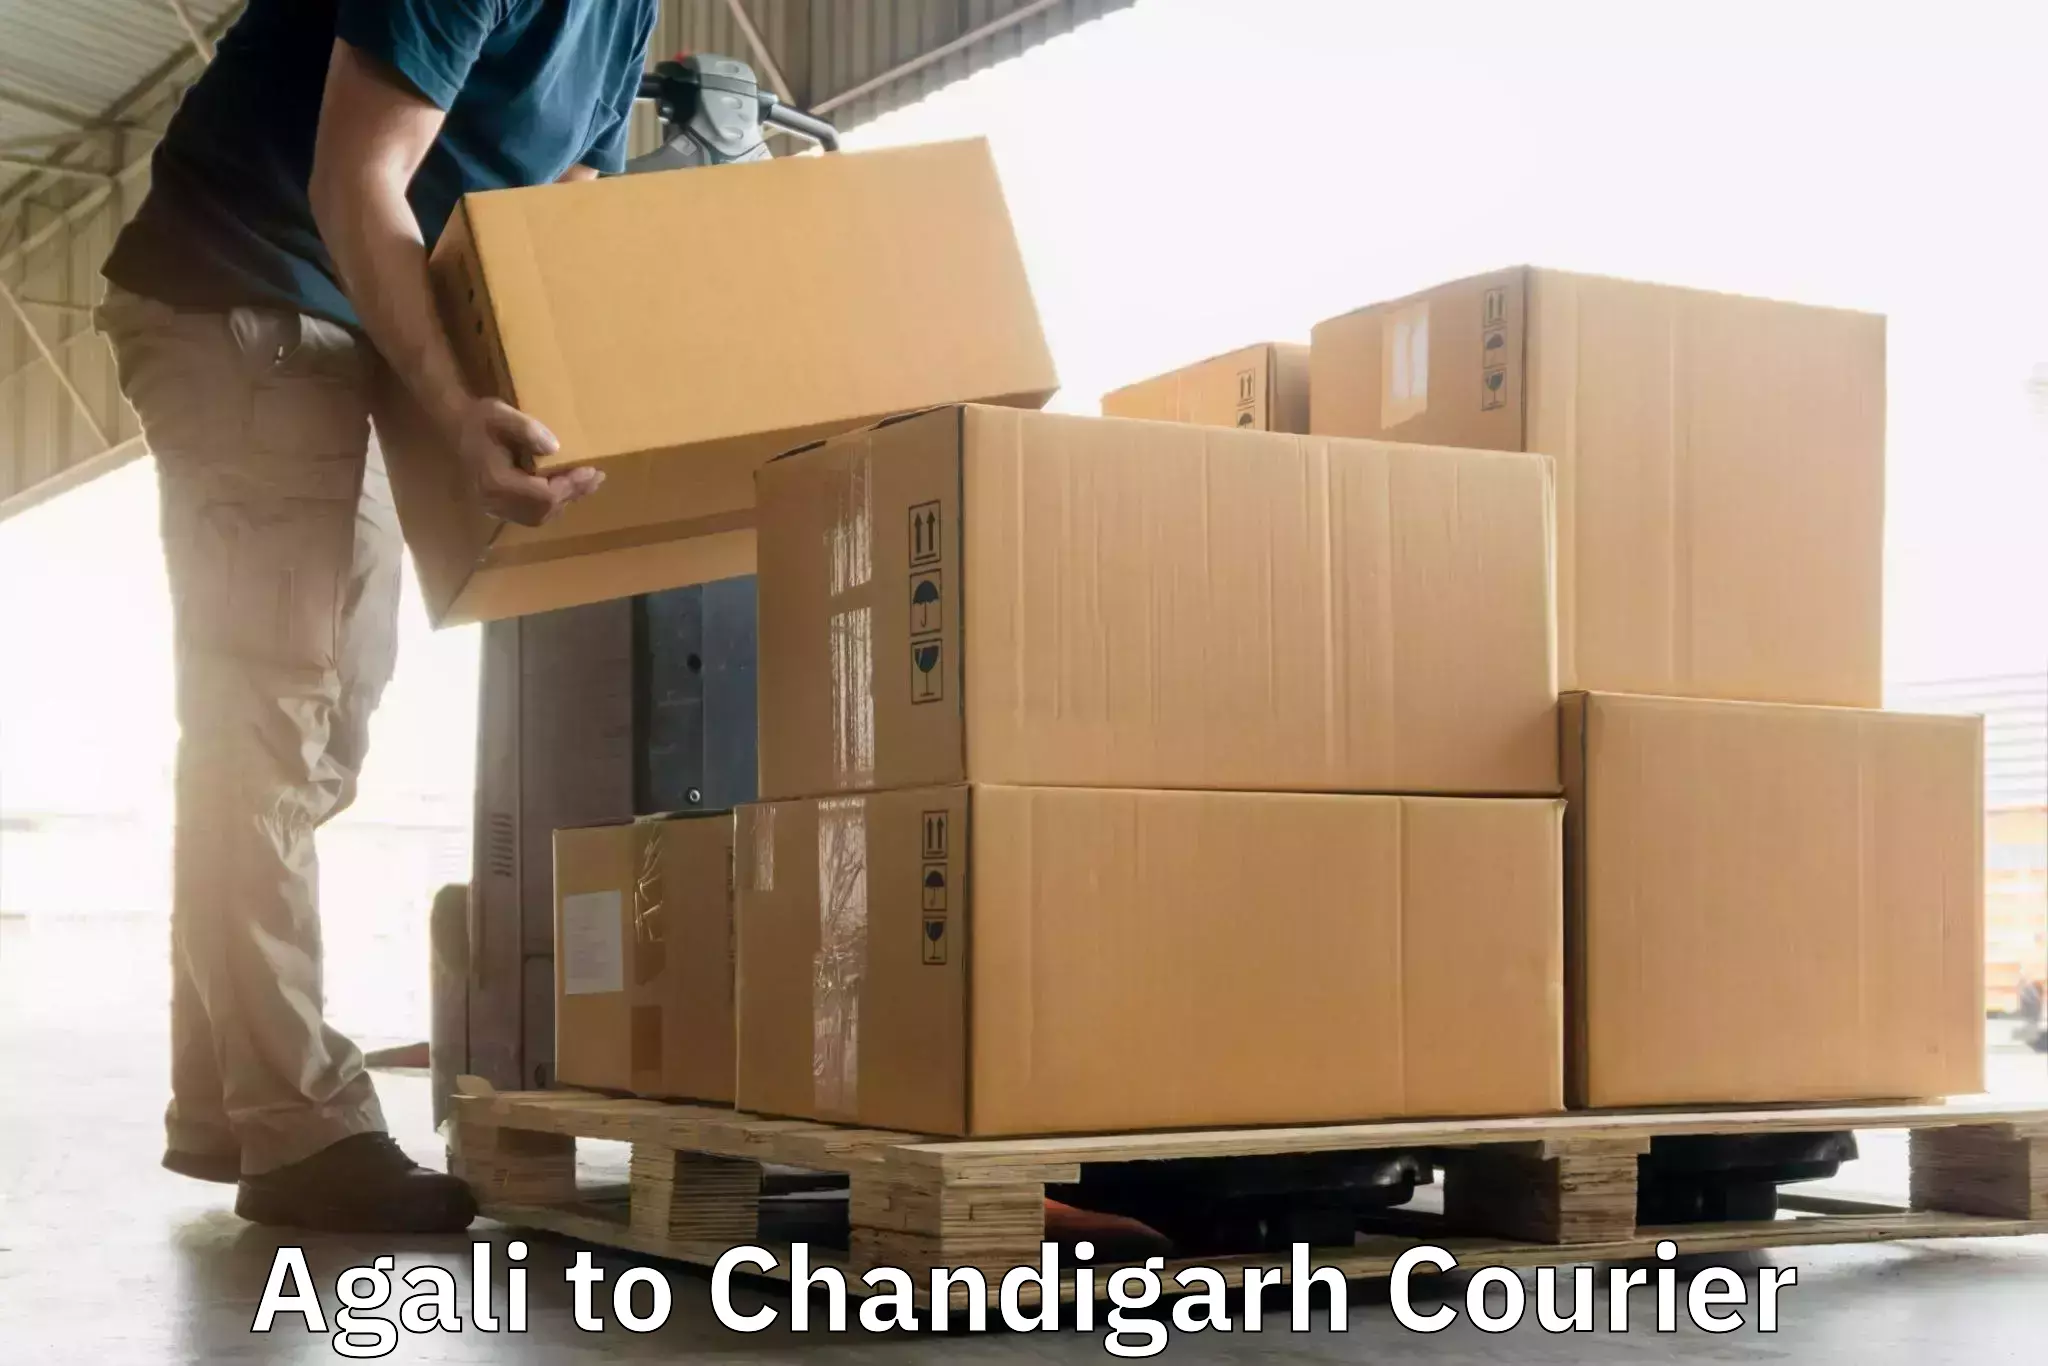 Modern delivery methods Agali to Chandigarh